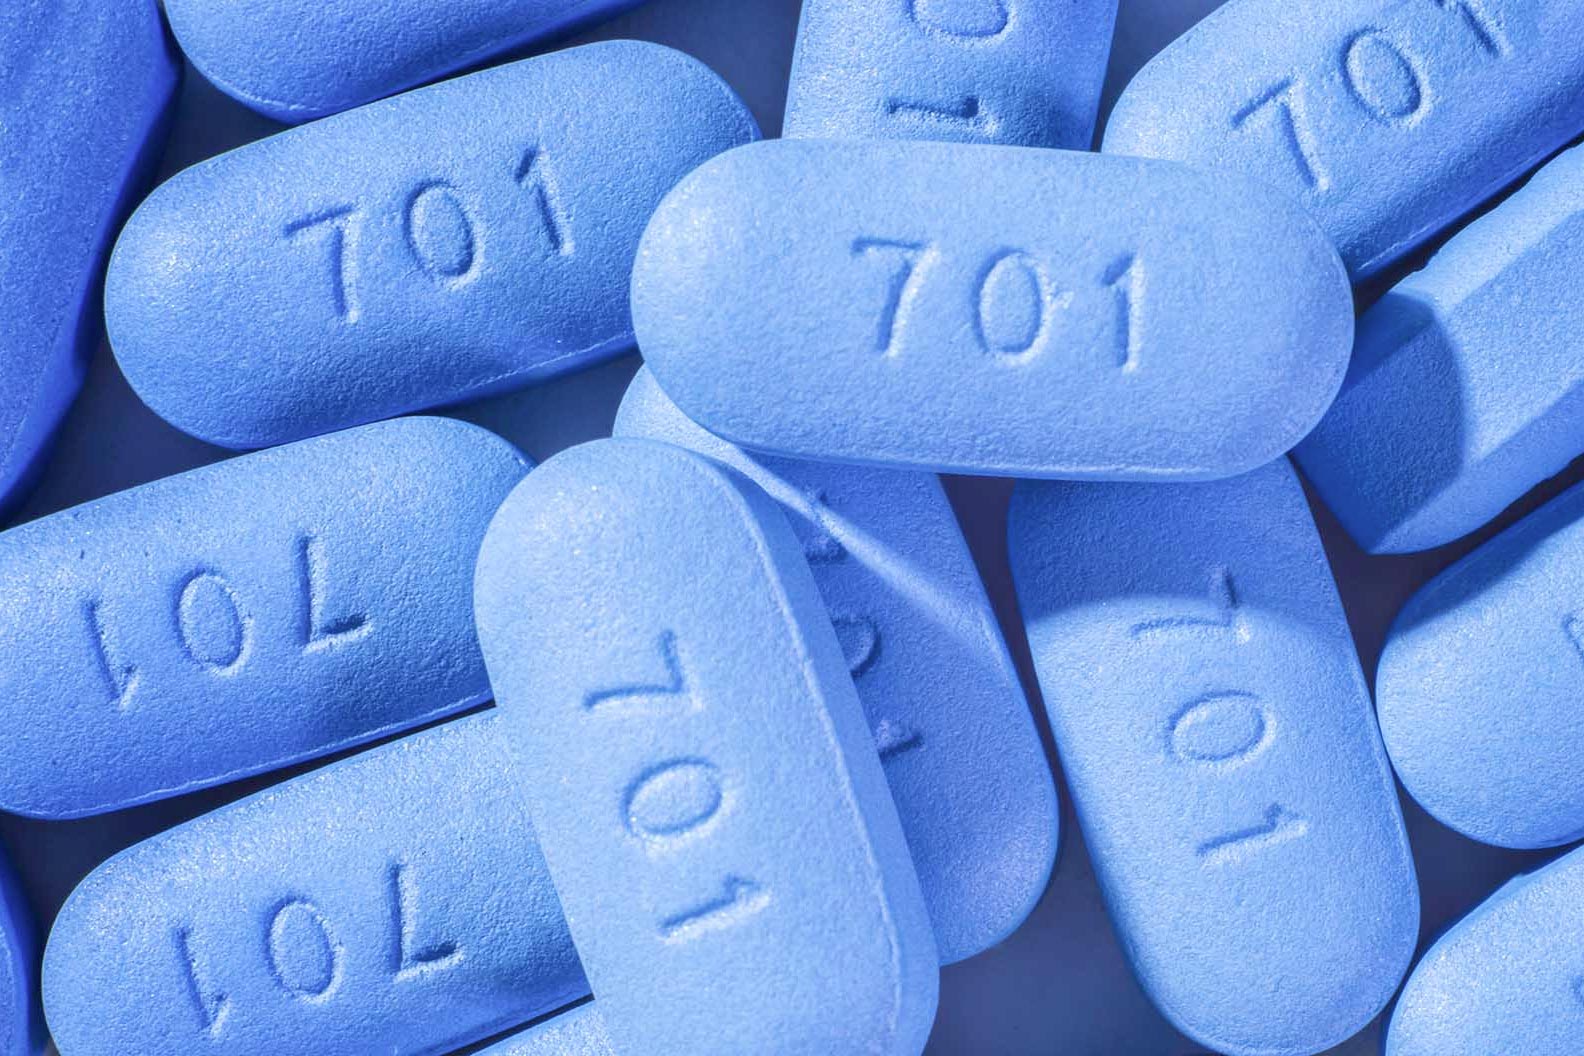 Blue hiv pill with the number 701 written on them